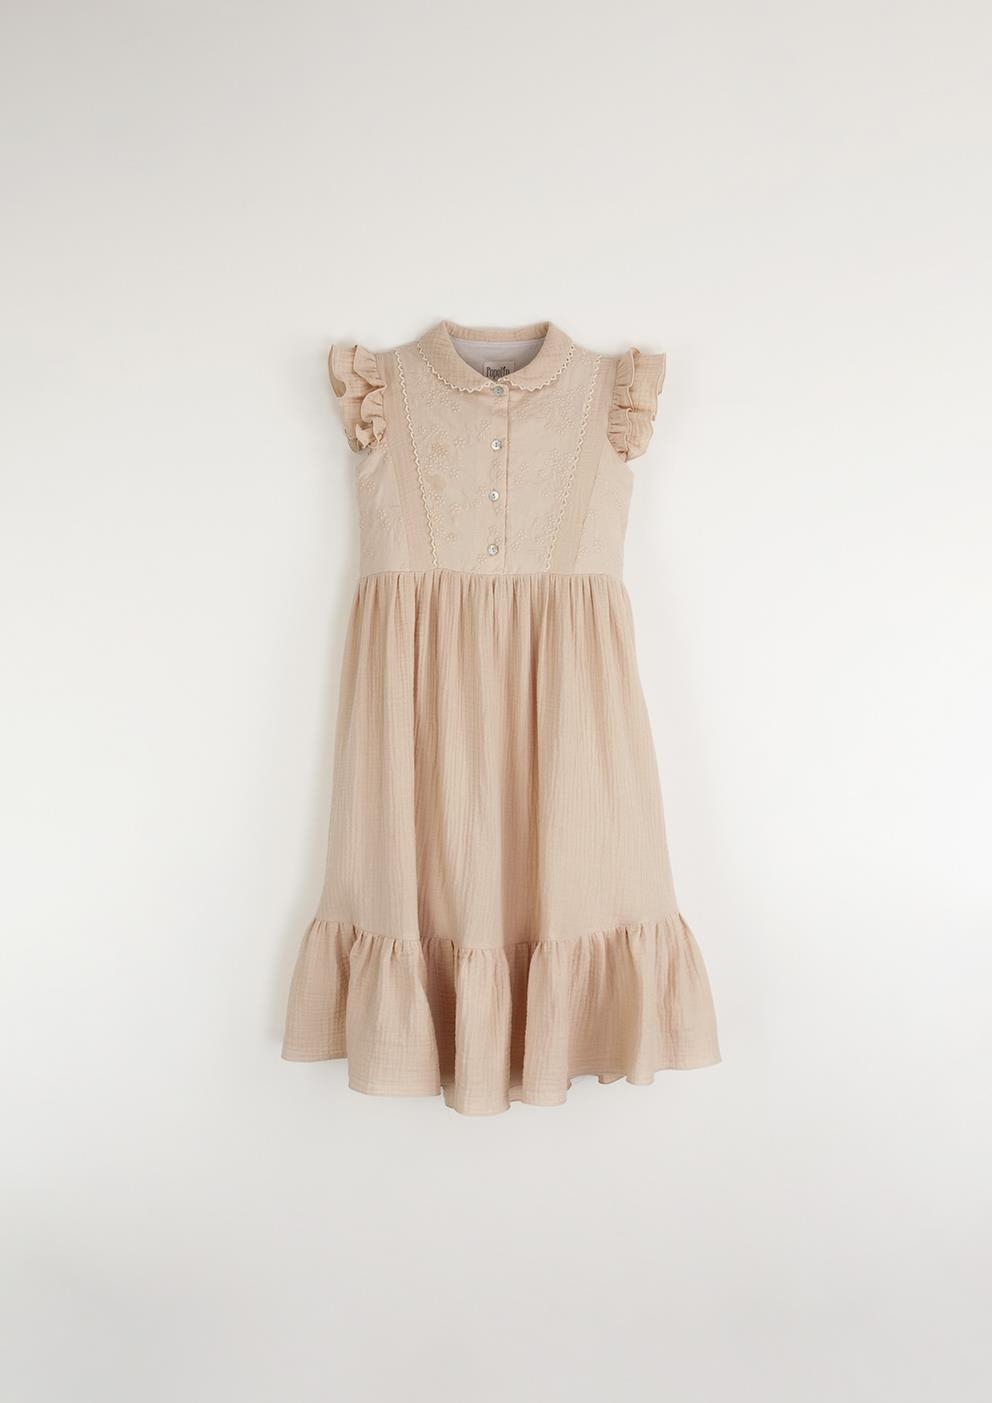 Mod.30.1 Organic pink dress with baby-style collar | SS23 Mod.30.1 Organic pink dress with baby-style collar